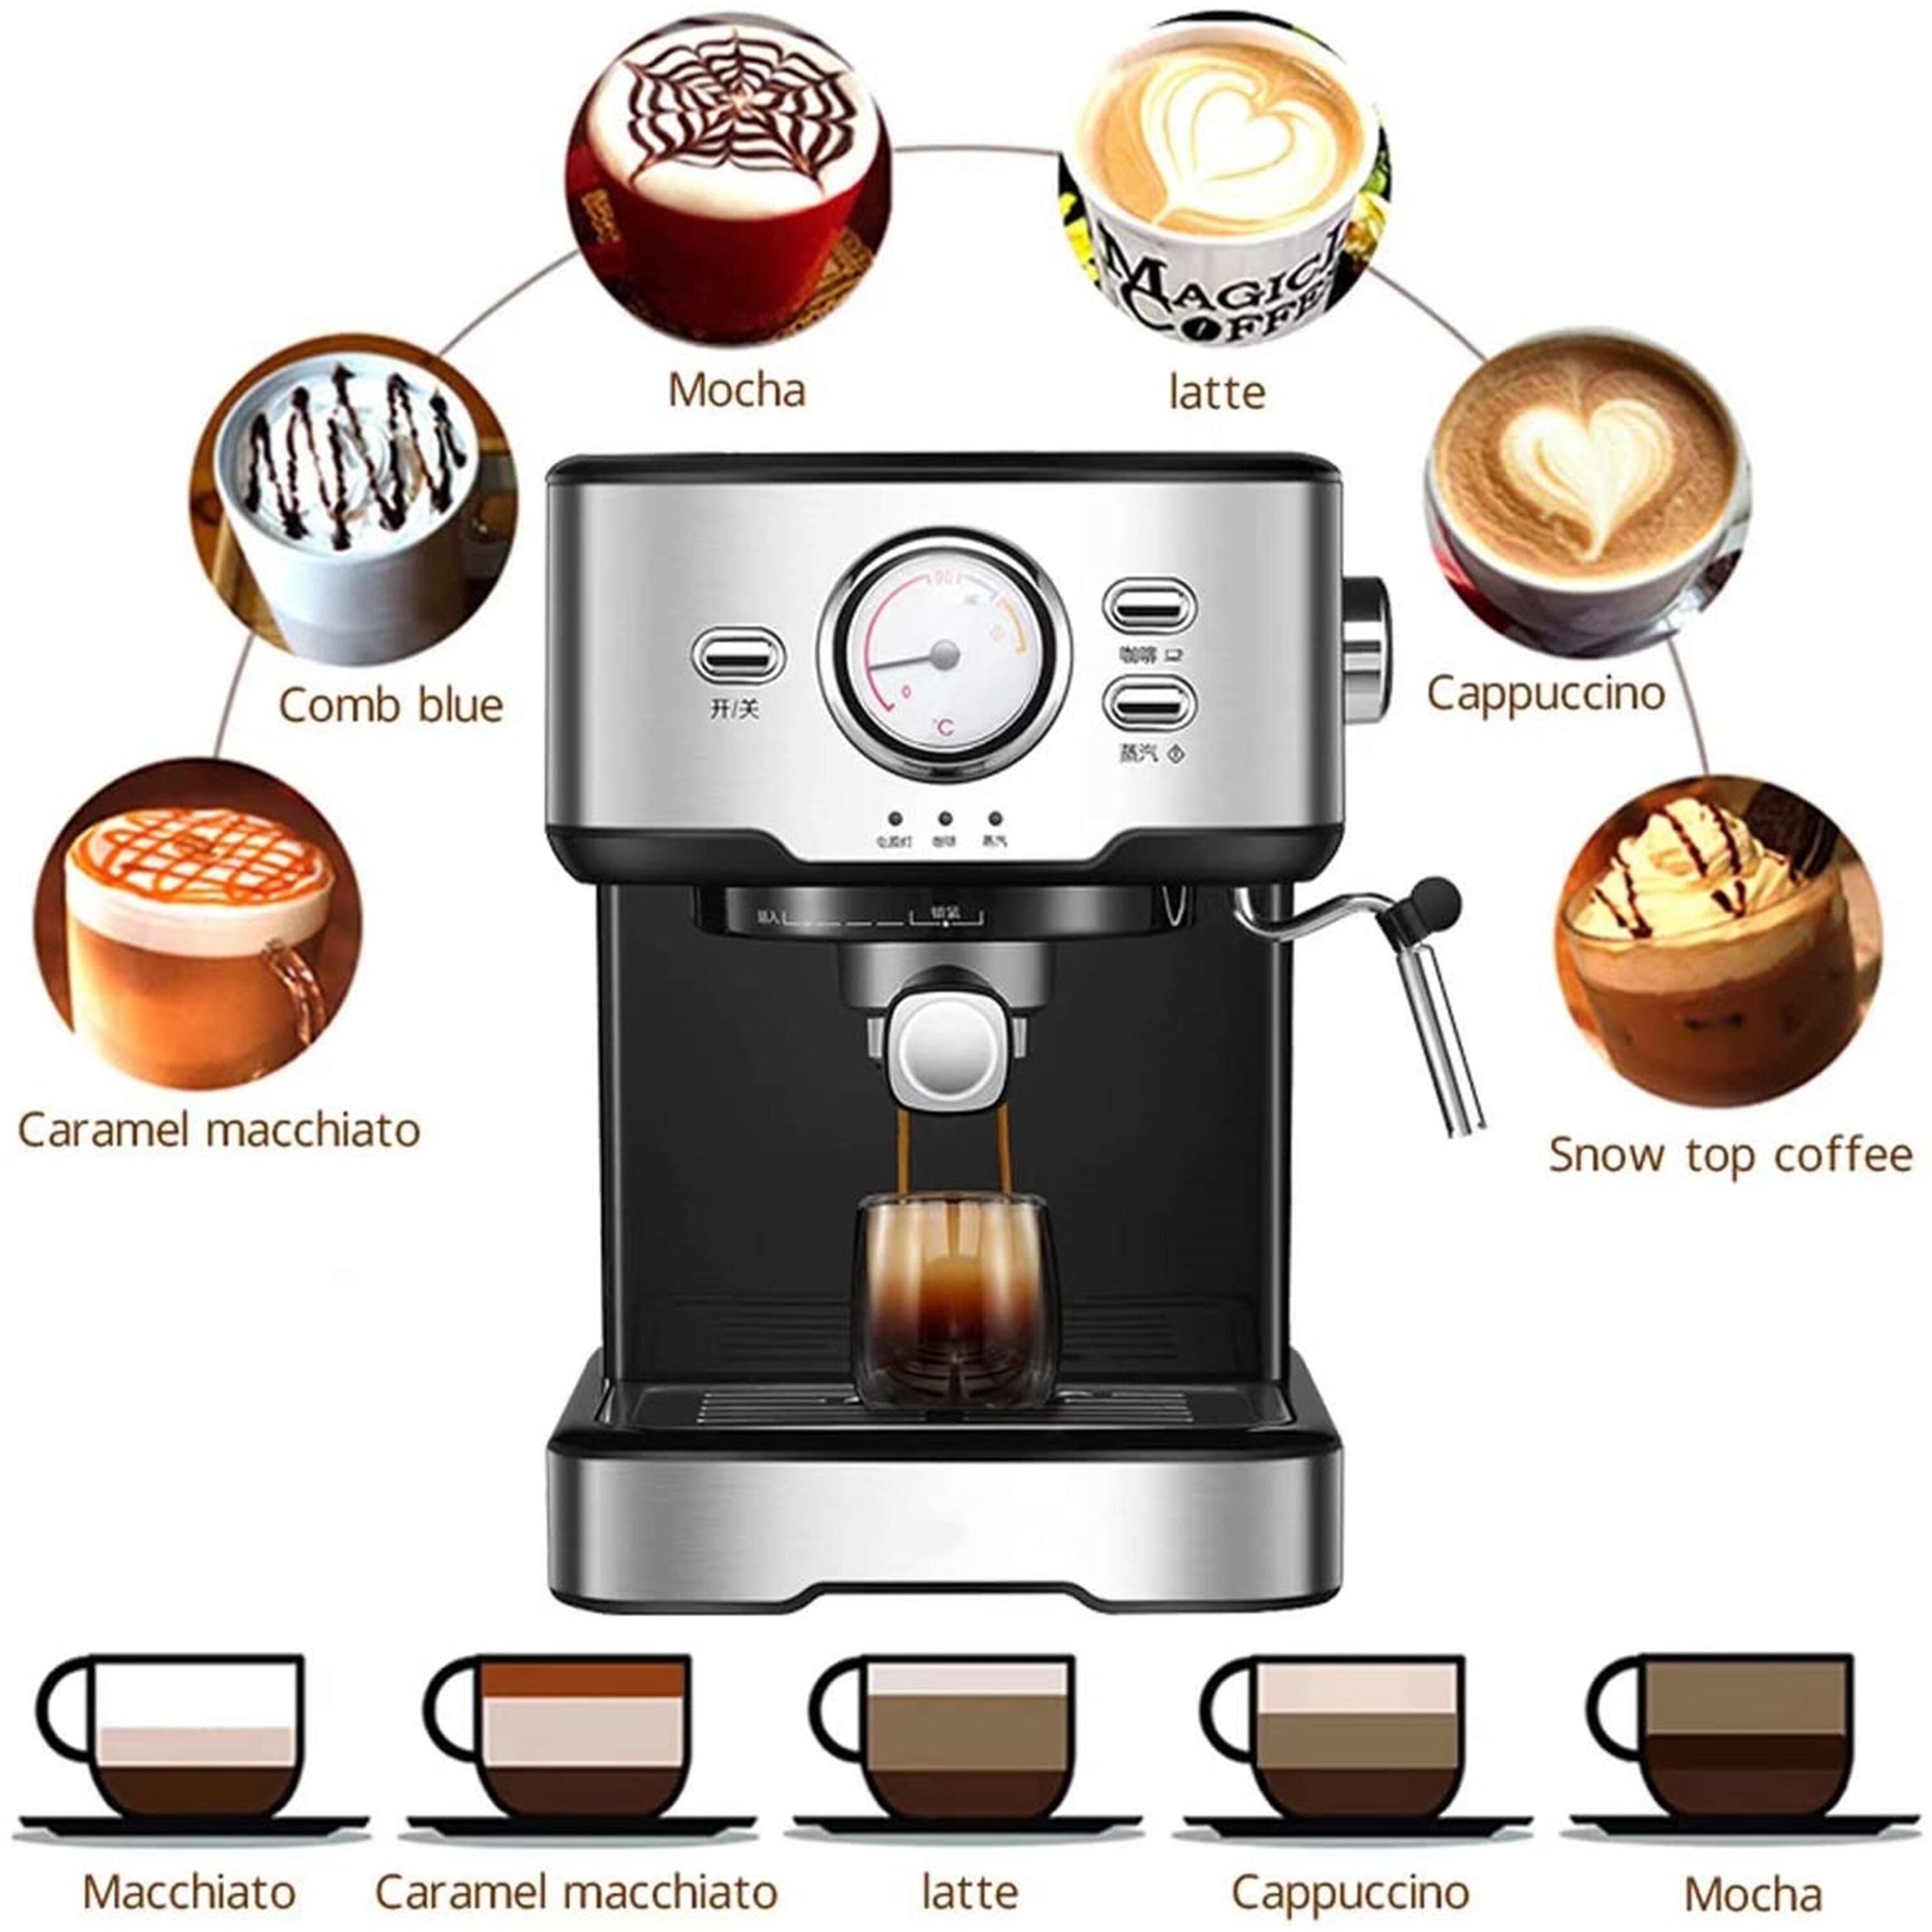 https://ak1.ostkcdn.com/images/products/is/images/direct/714cad6135bf741eaada330ced680dfe17c3b6cc/20Bar-Coffee-Machine-Maker-Espresso-Cups-Semi-Automatic-Household-Steam-Milk-Frother.jpg